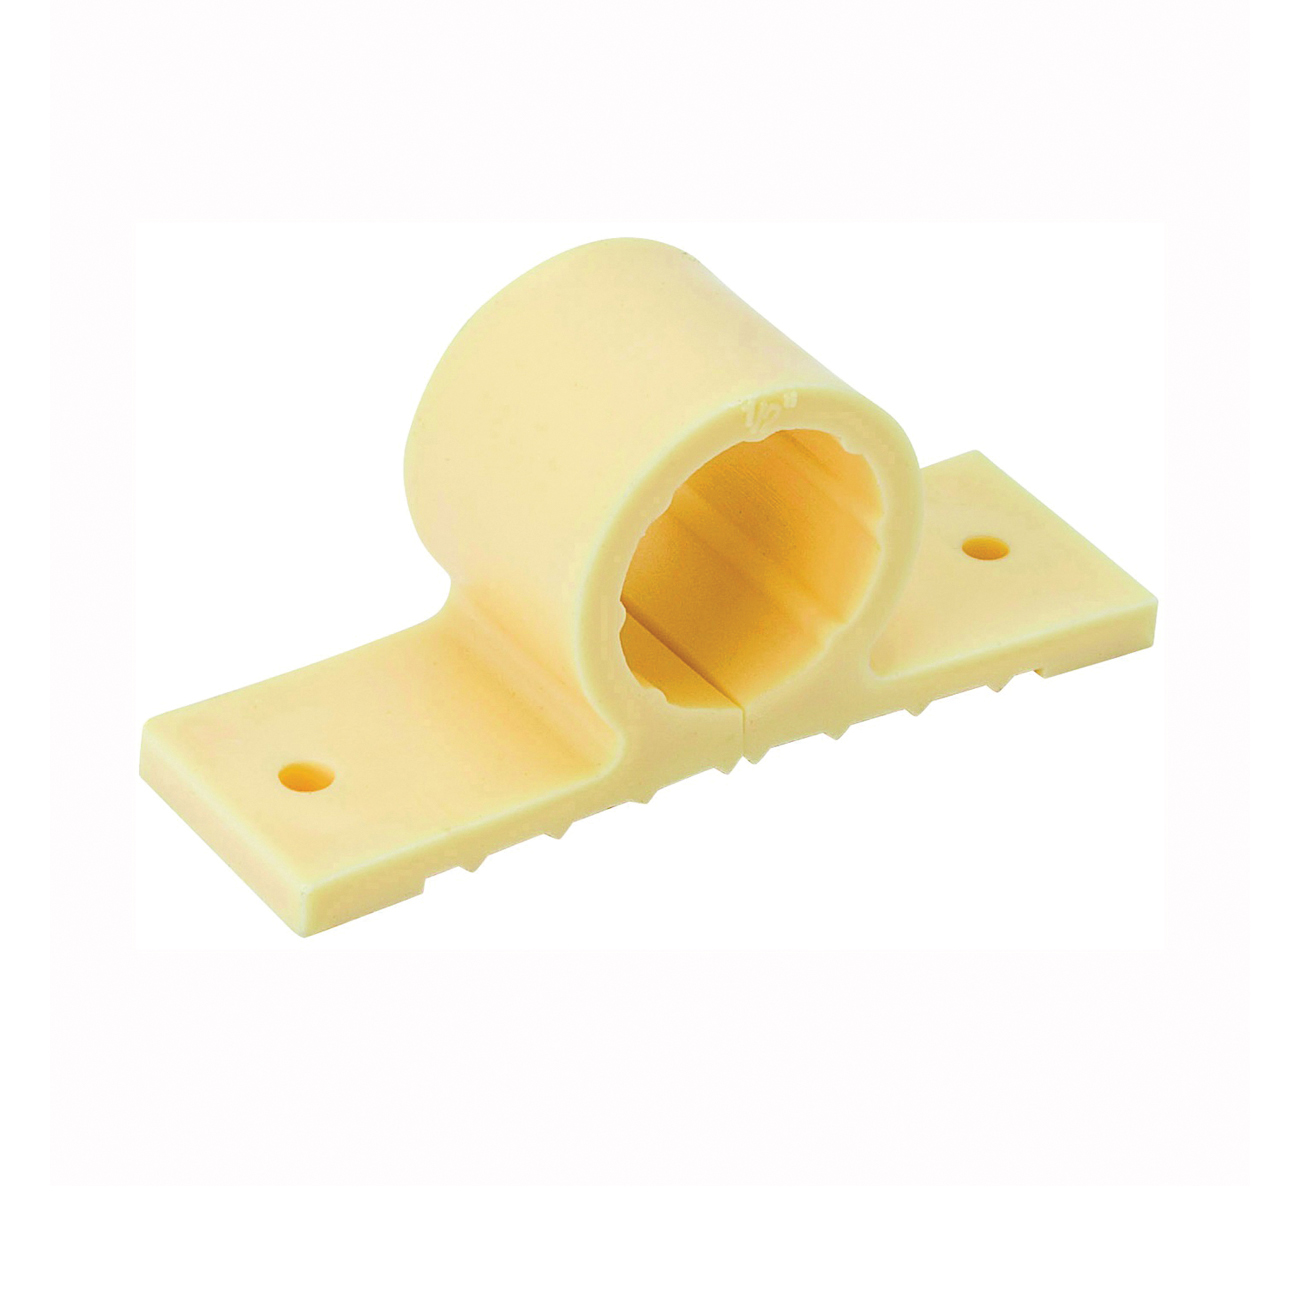 P28-100HC 2-Hole Standard Pipe Clamp, Polypropylene, 1 in Pipe/Conduit